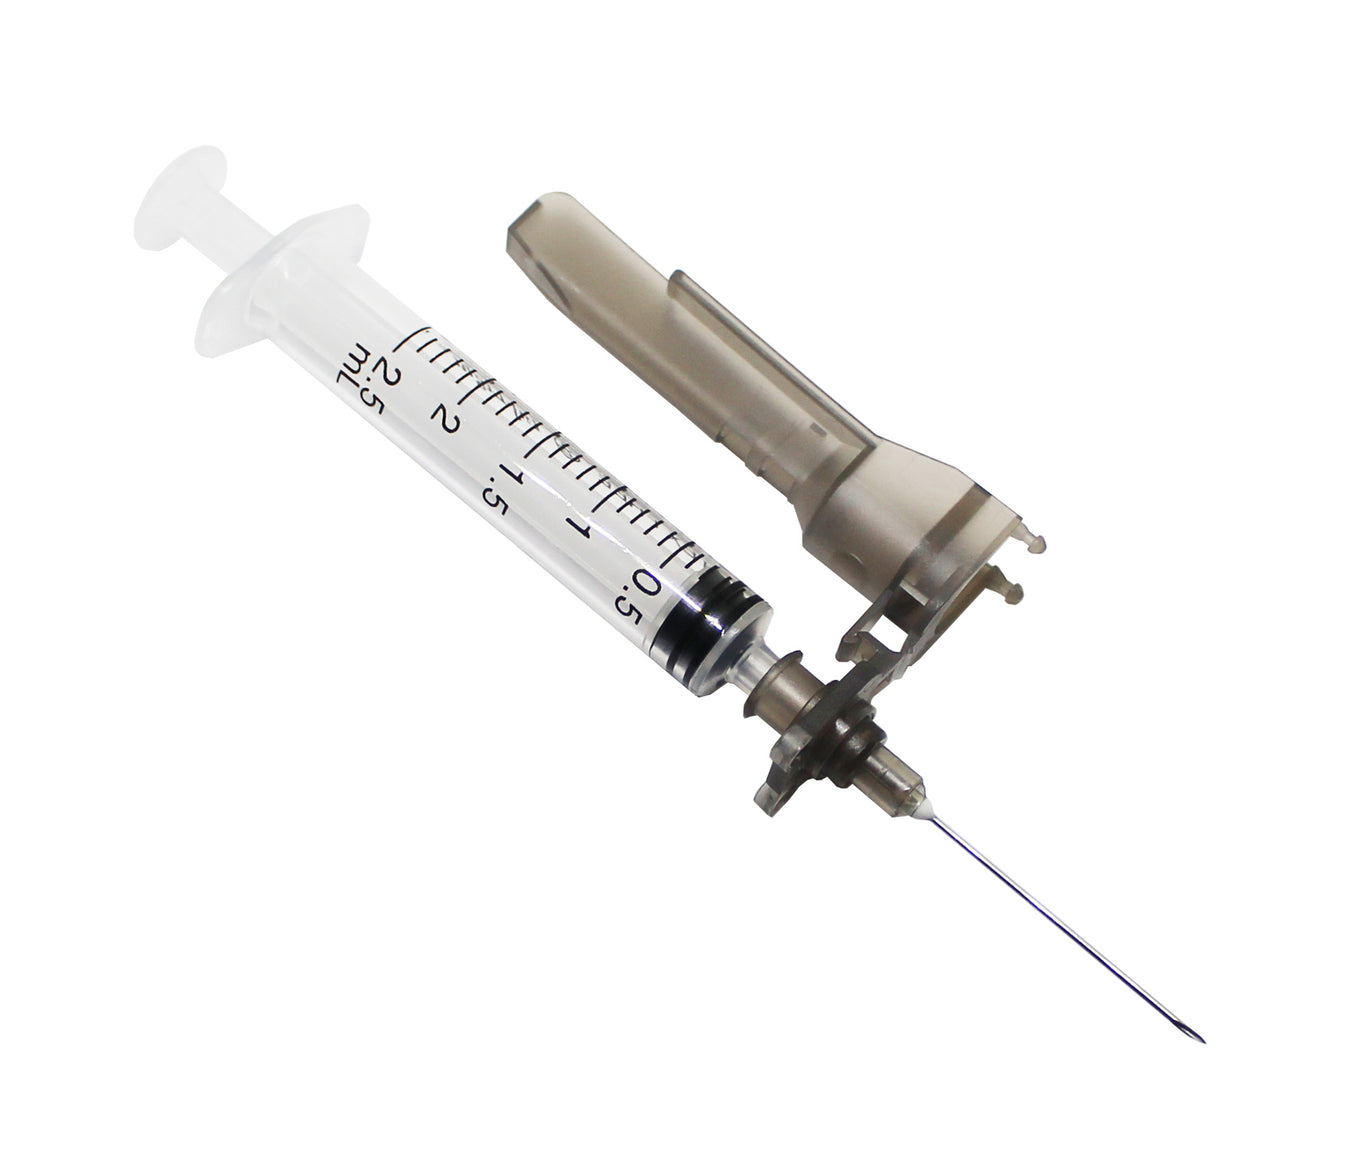 2ml syringe with safety hypodermic needles in accordance with the sharp regulation 2013 